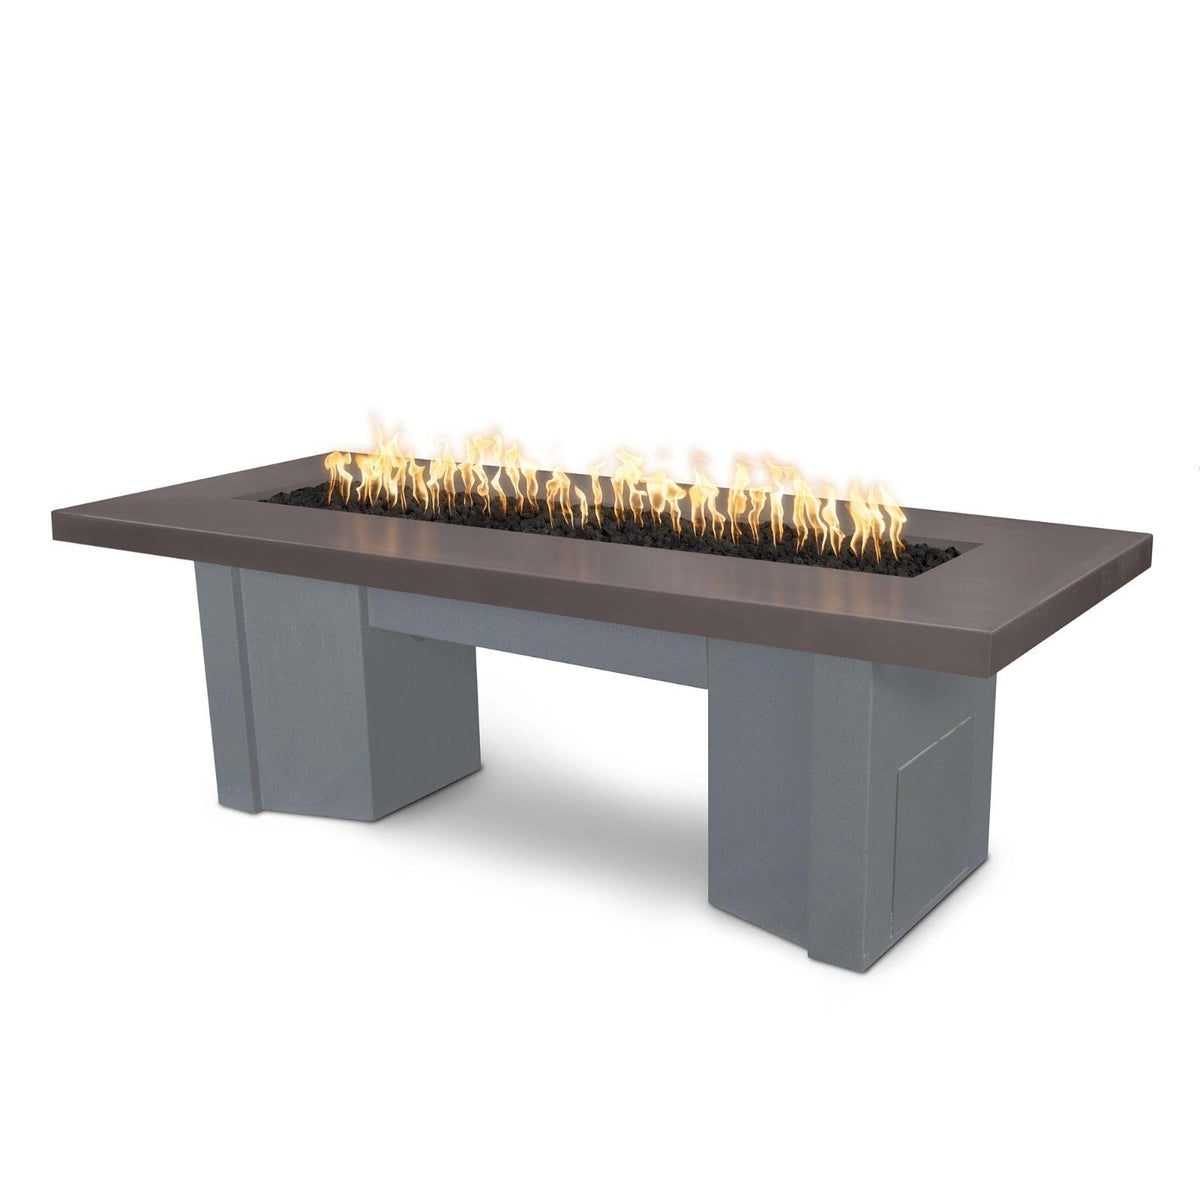 The Outdoor Plus Fire Features Chestnut (-CST) / Gray Powder Coated Steel (-GRY) The Outdoor Plus 78&quot; Alameda Fire Table Smooth Concrete in Liquid Propane - Flame Sense System with Push Button Spark Igniter / OPT-ALMGFRC78FSEN-LP